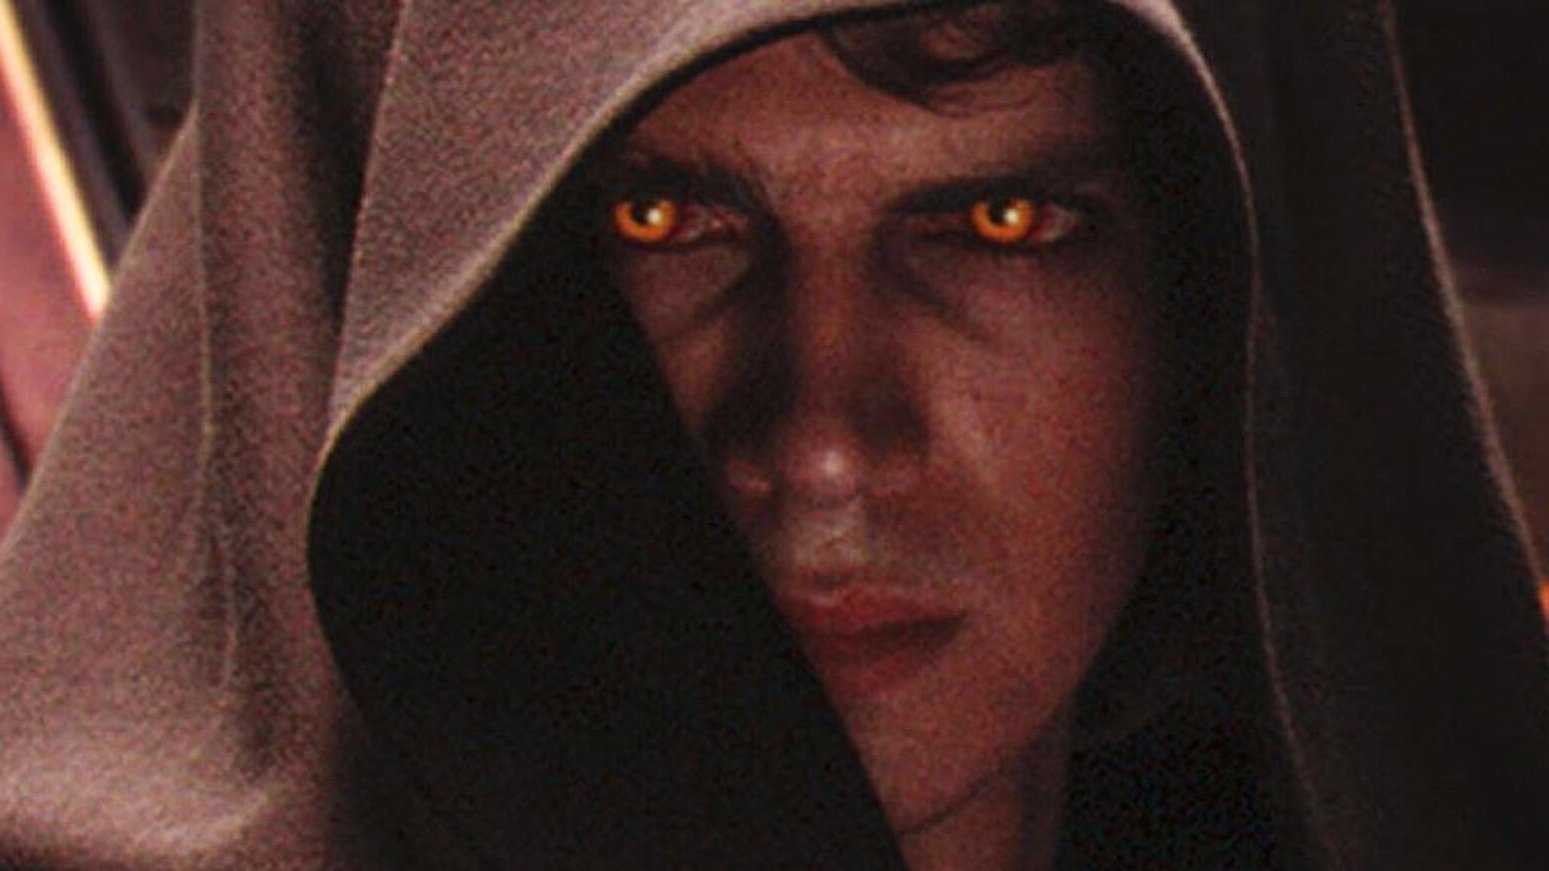 Hayden Christensen’s Return As Darth Vader Revealed, And It’s Disappointing